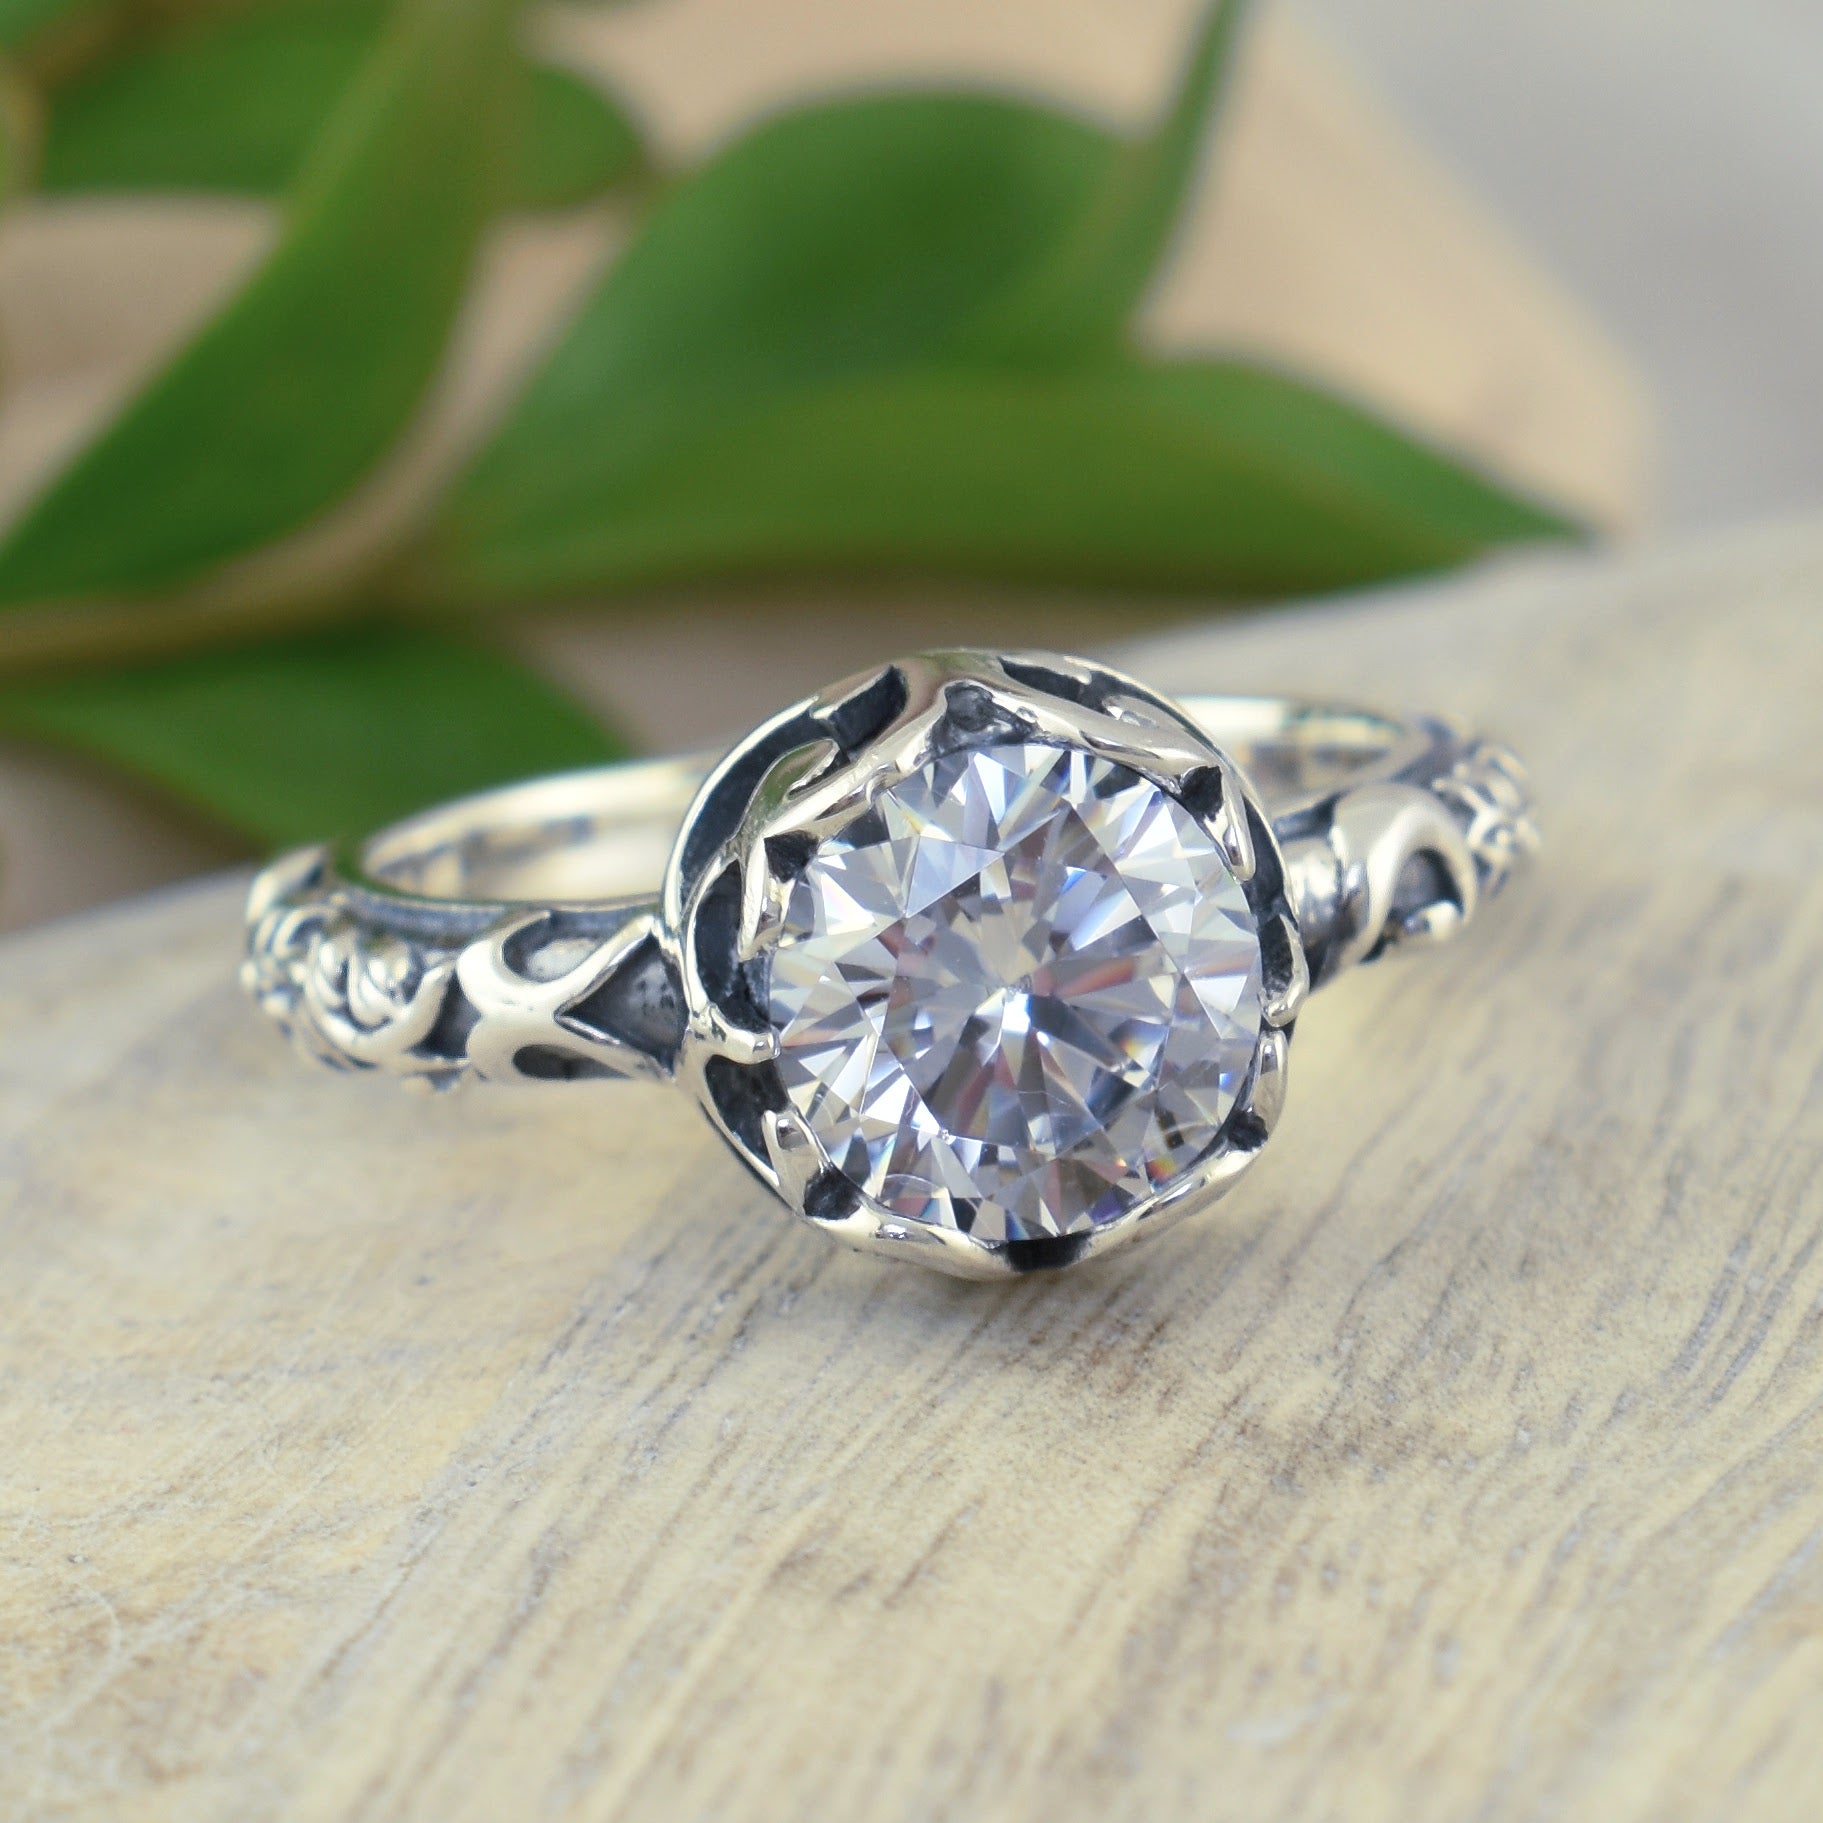 .925 sterling silver filigree ring with cz